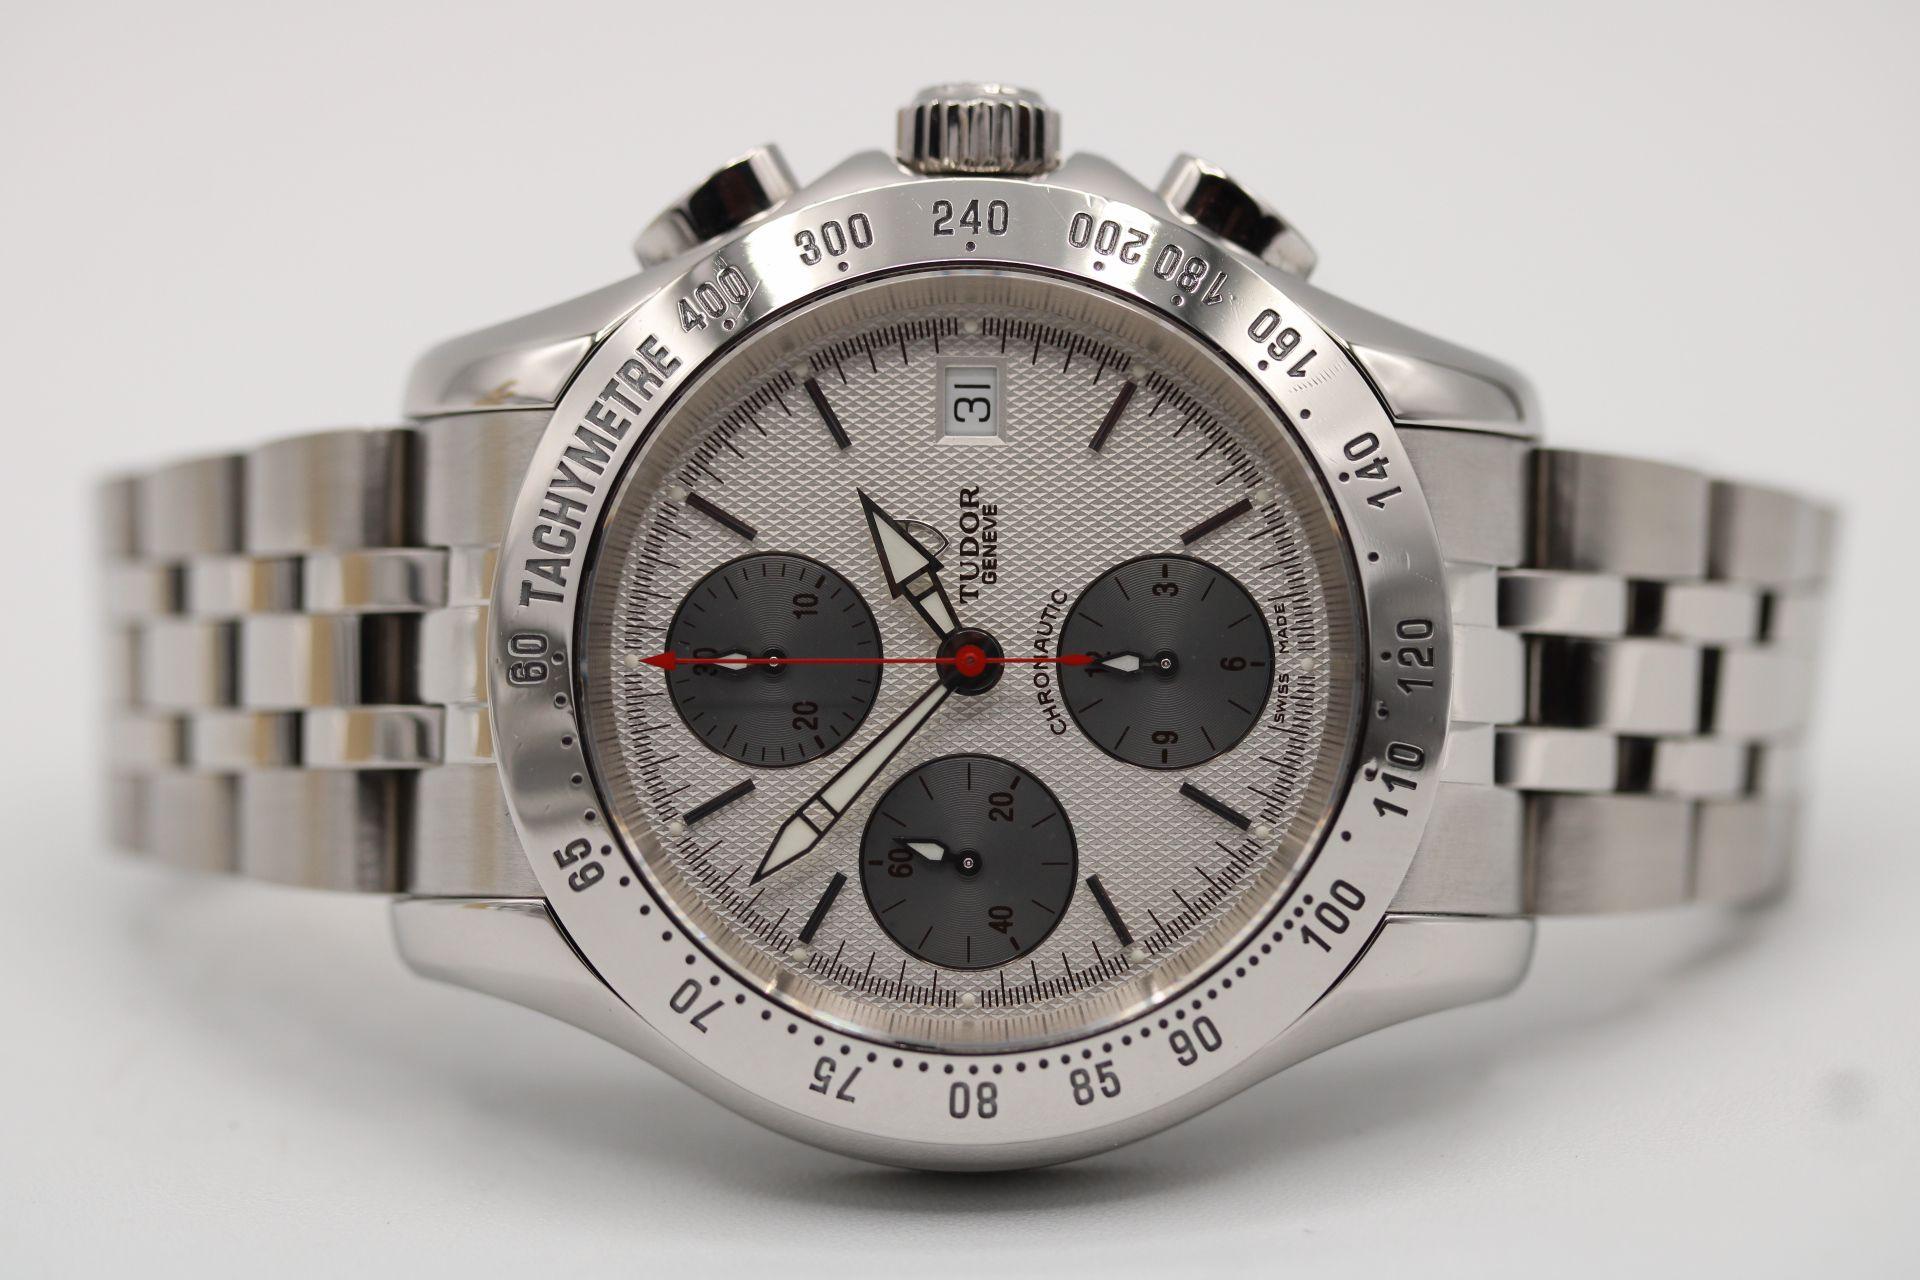  Tudor Chronautic Chronograph  79390/P Full Set 2007  In Excellent Condition For Sale In London, GB